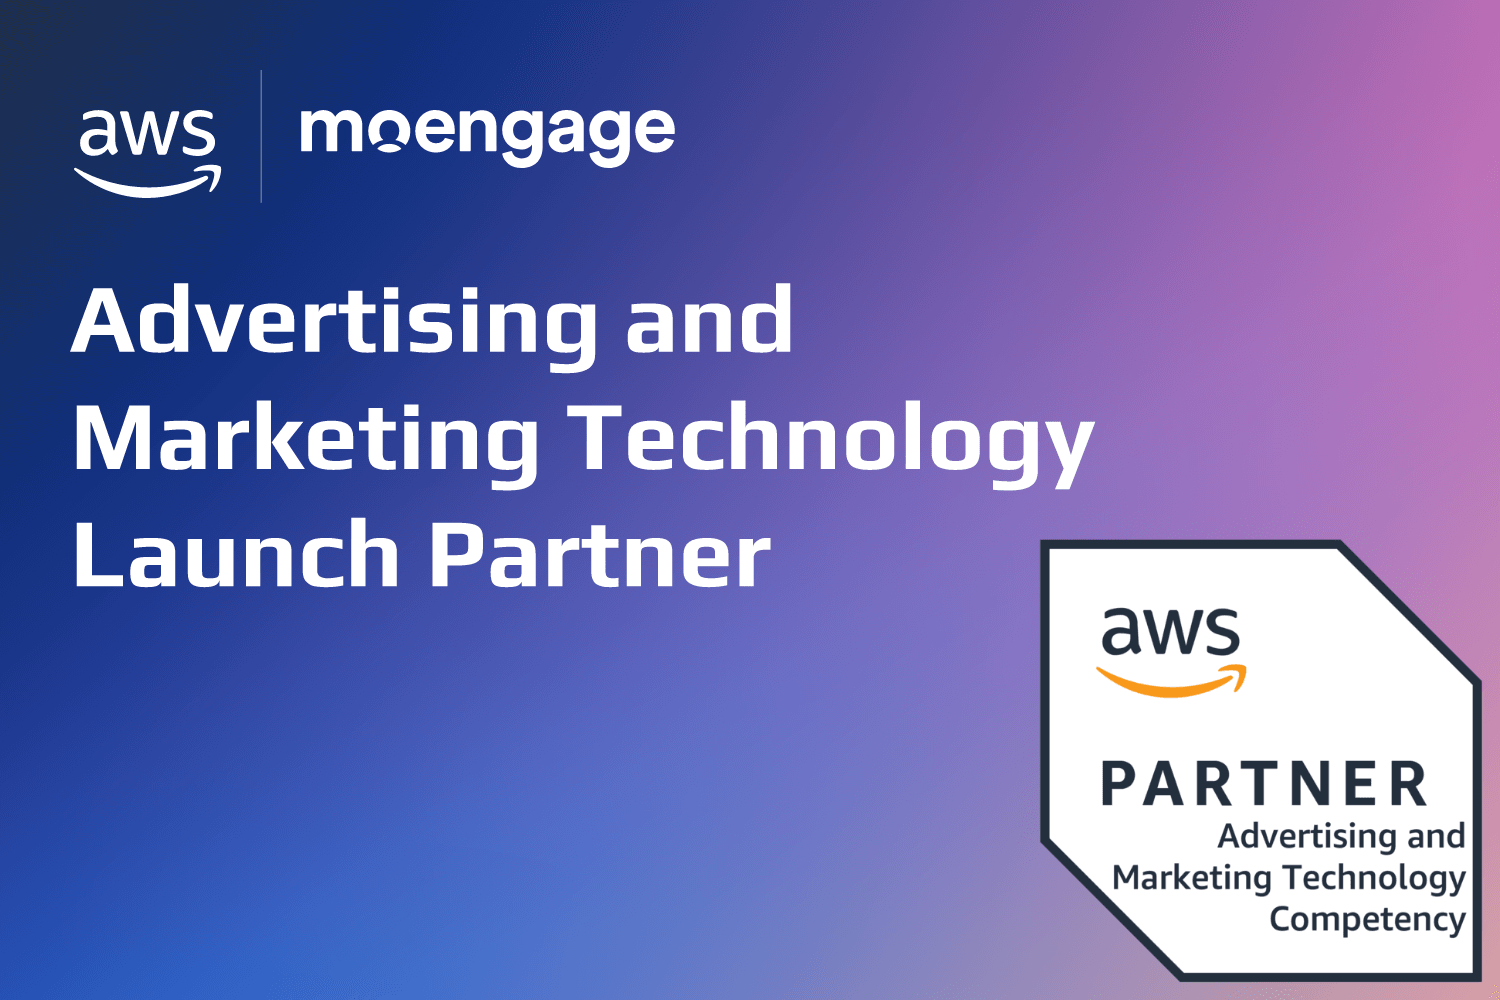 MoEngage Achieves the new AWS Advertising and Marketing Technology Competency